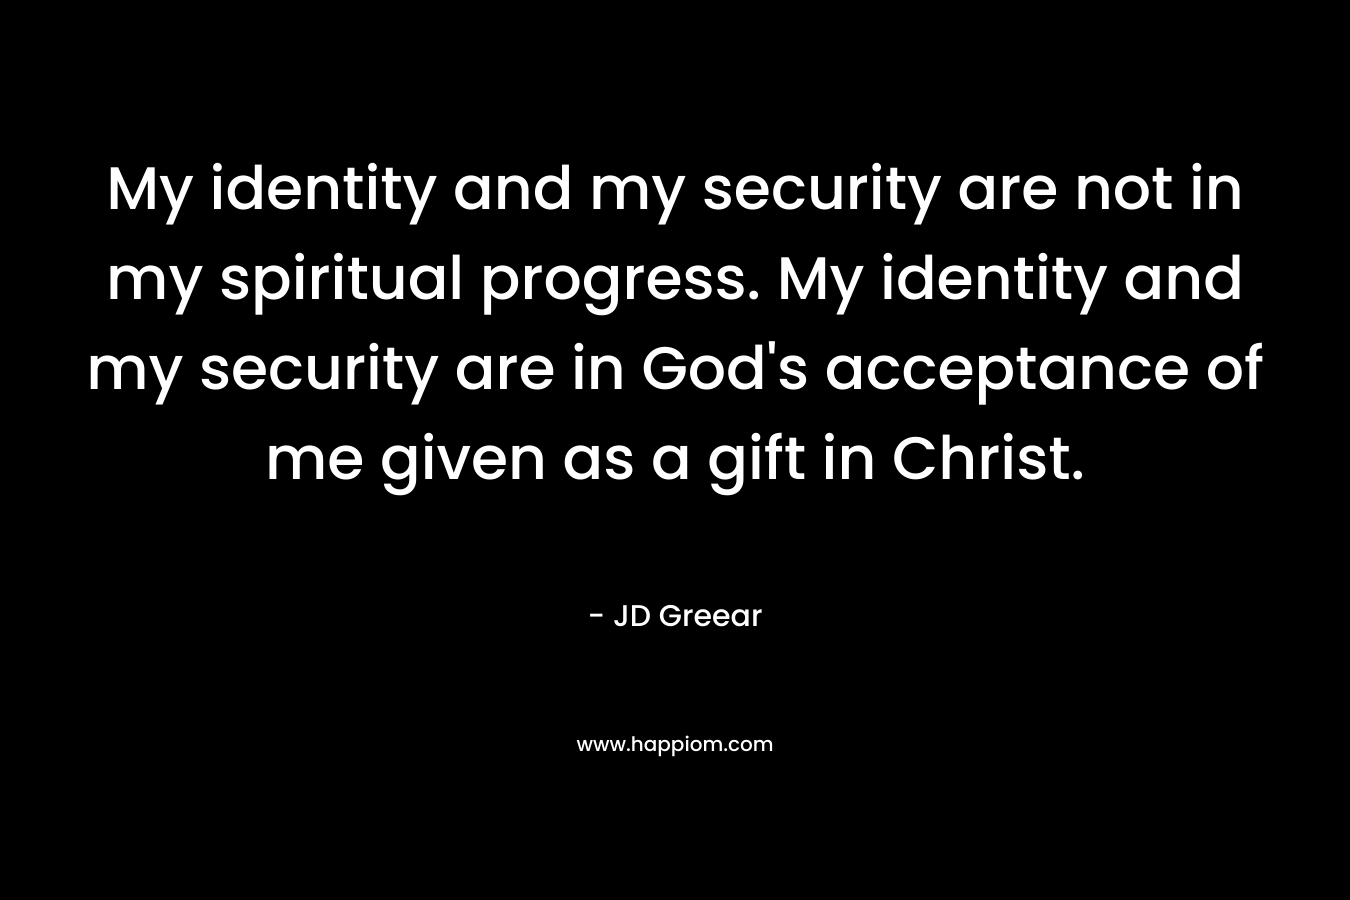 My identity and my security are not in my spiritual progress. My identity and my security are in God’s acceptance of me given as a gift in Christ. – JD Greear